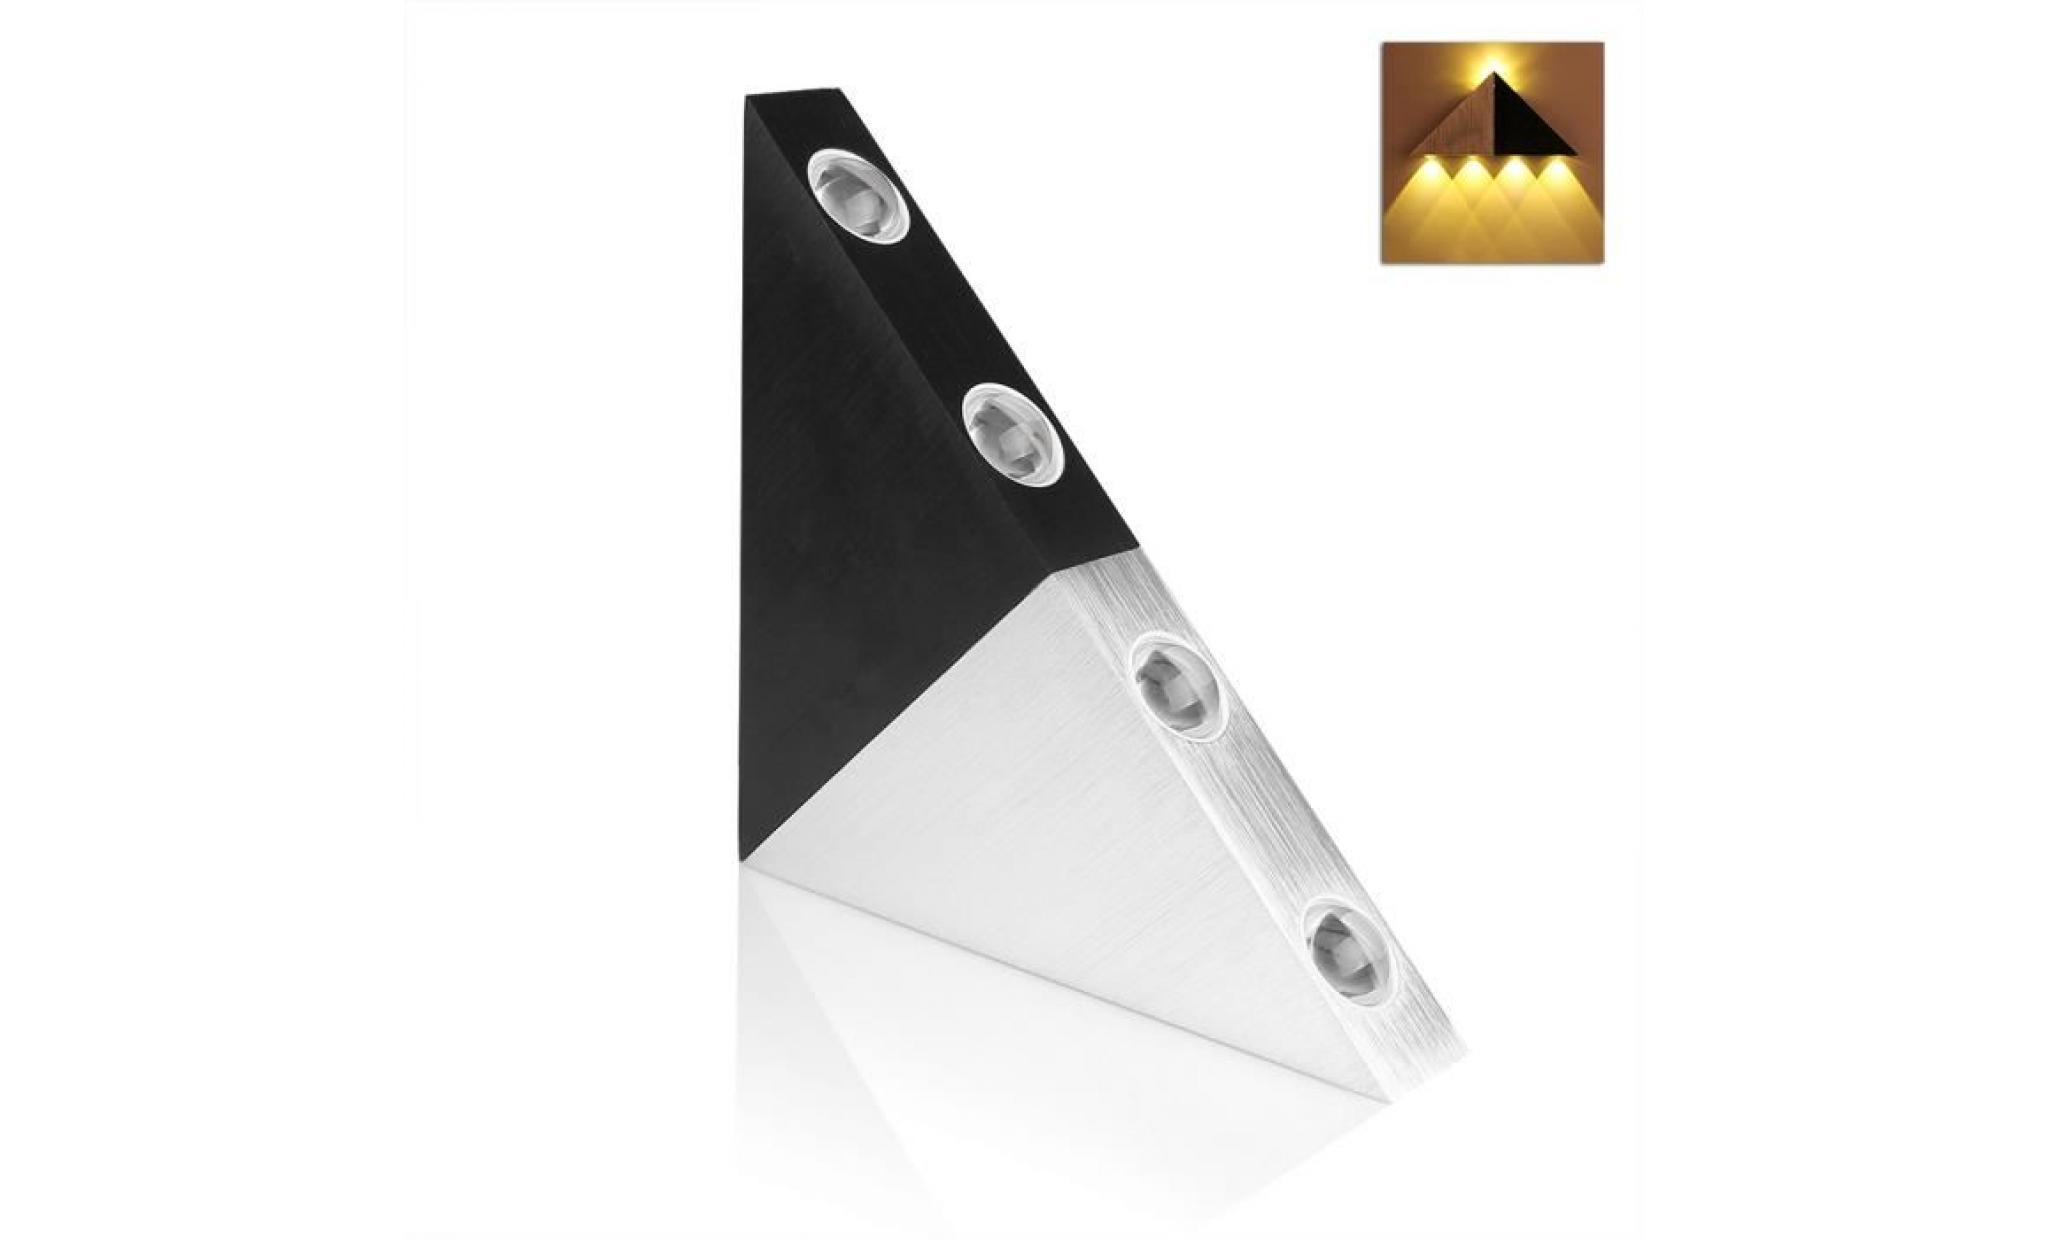 Moderne 5W Triangle Wall Light Up & Down LED Lighting Applique Home Bar Salle Stair Chemin Nuit Lampe intérieure Warm White